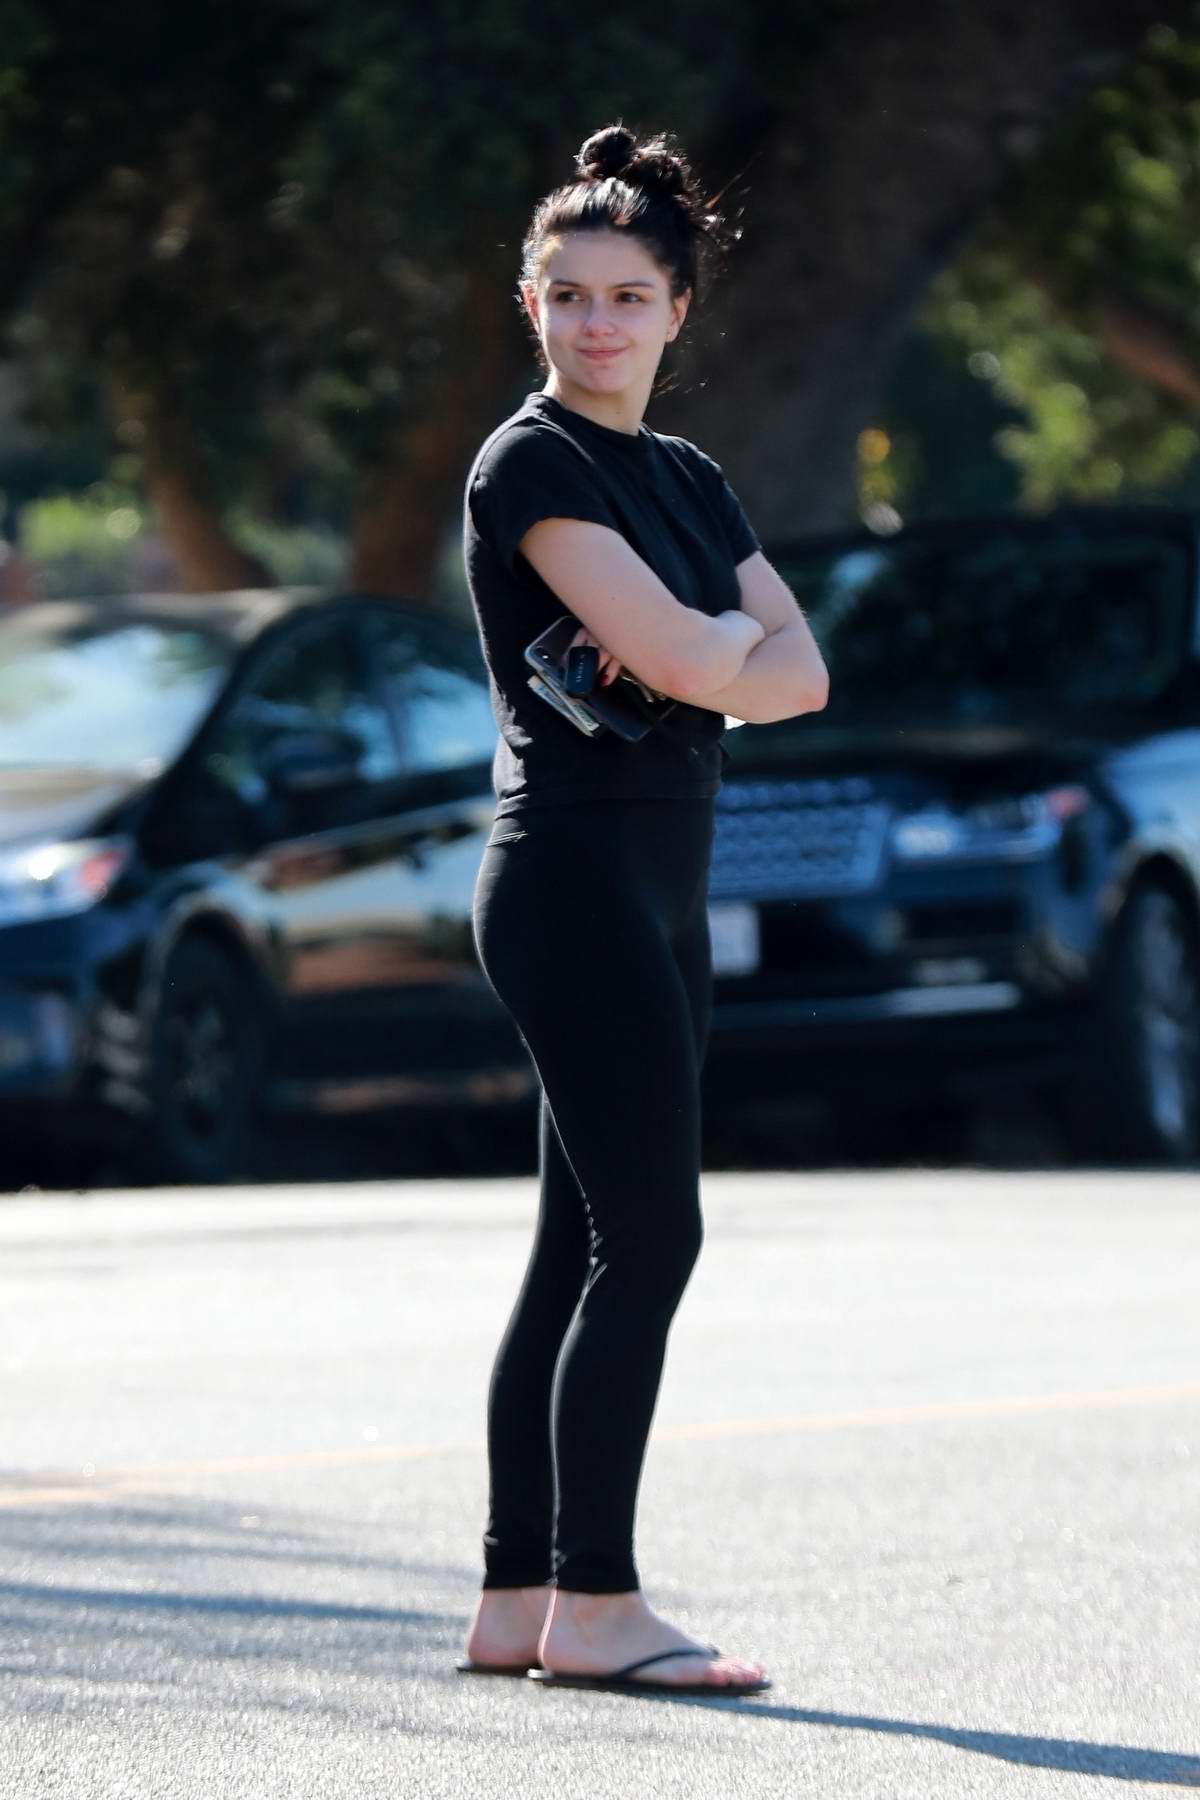 Ariel Winter keeps it casual in a black tee and leggings while running  errands in Los